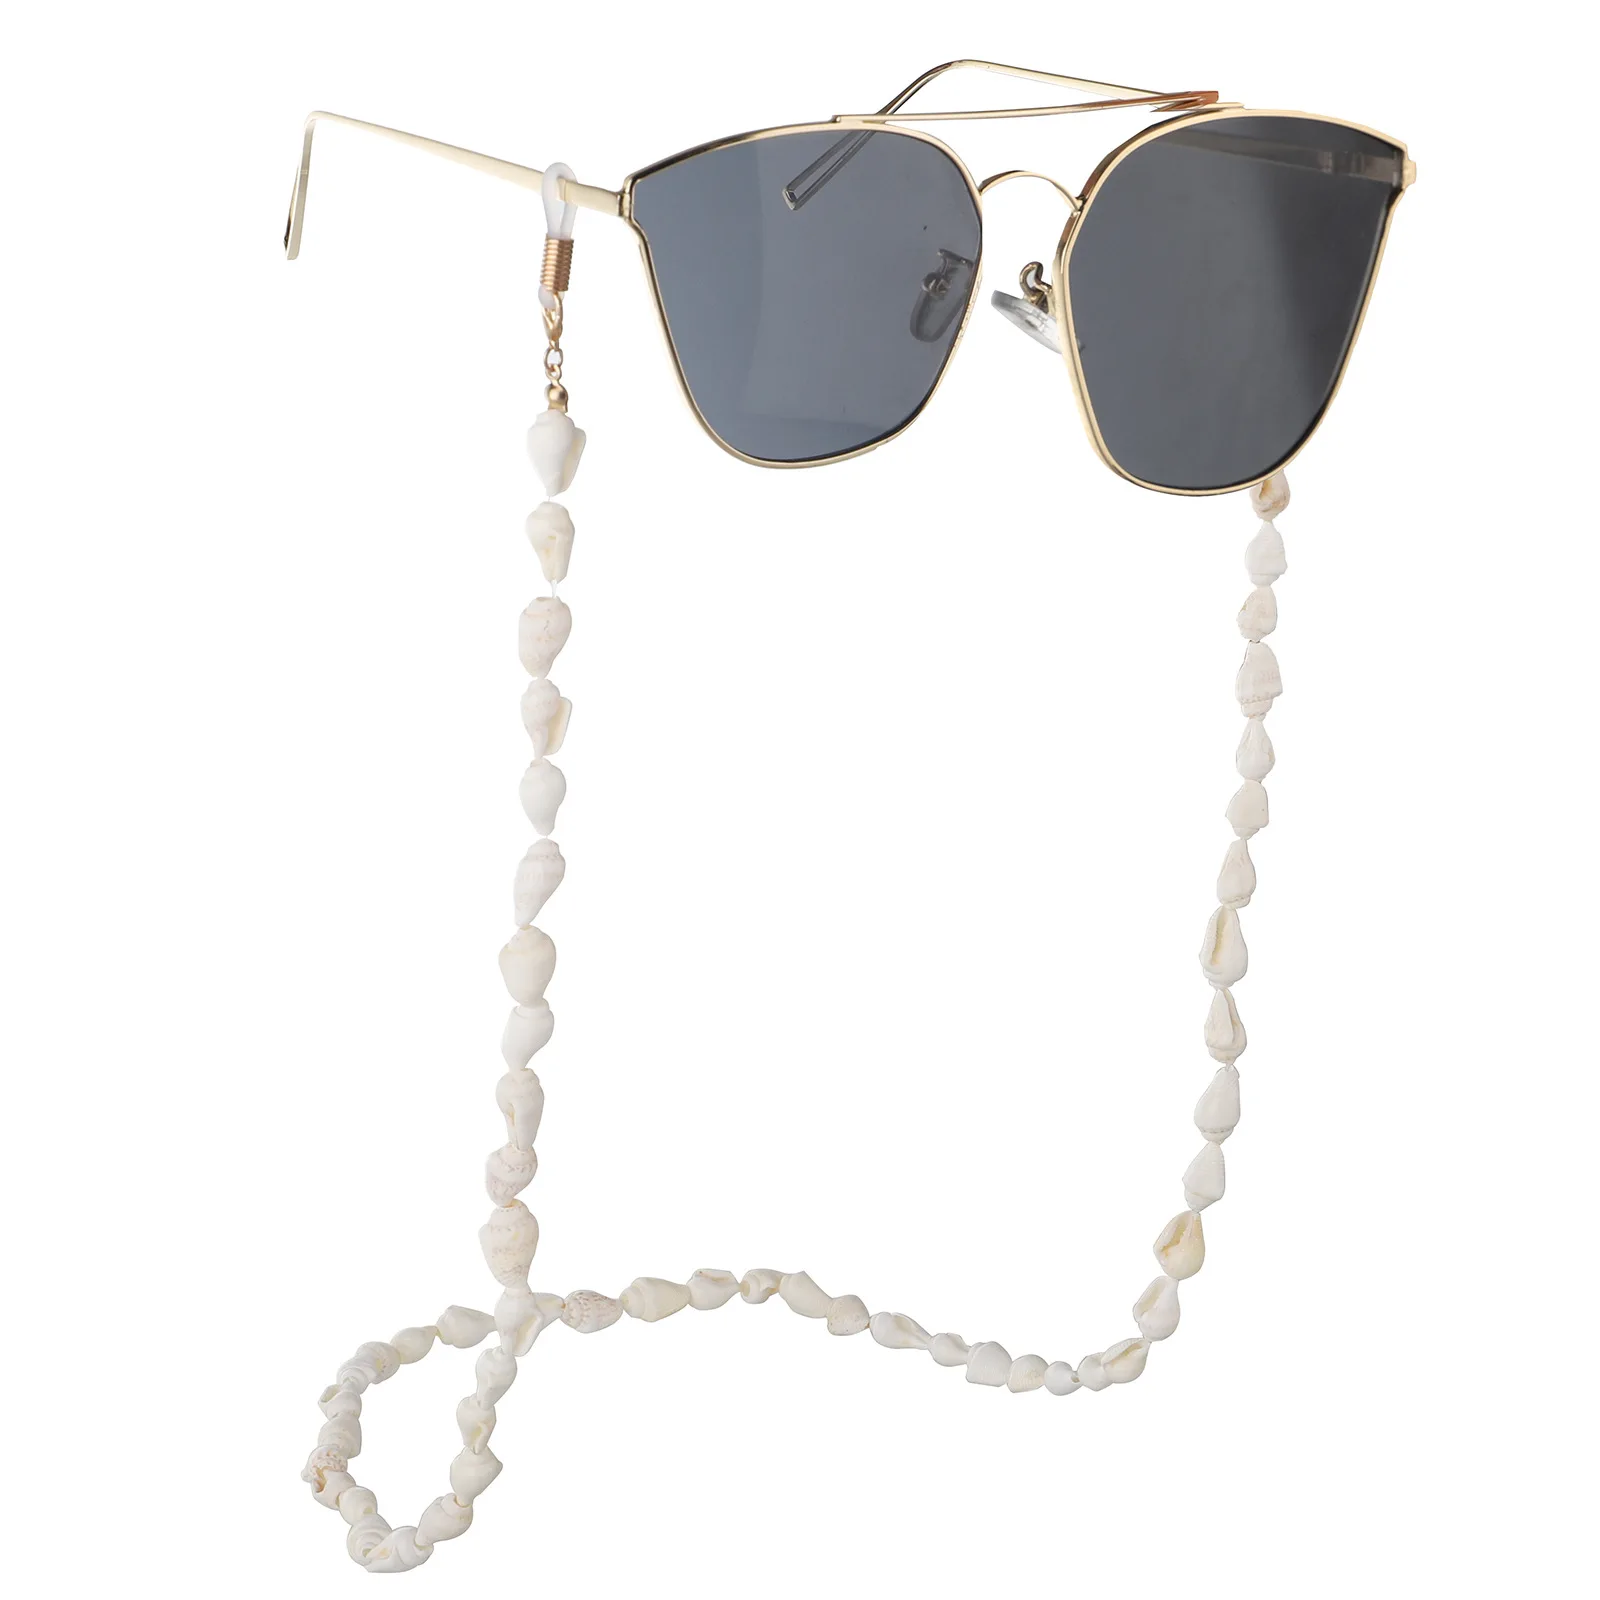 Sither Pearl Sunglasses Chian Reading Glasses Chain India | Ubuy